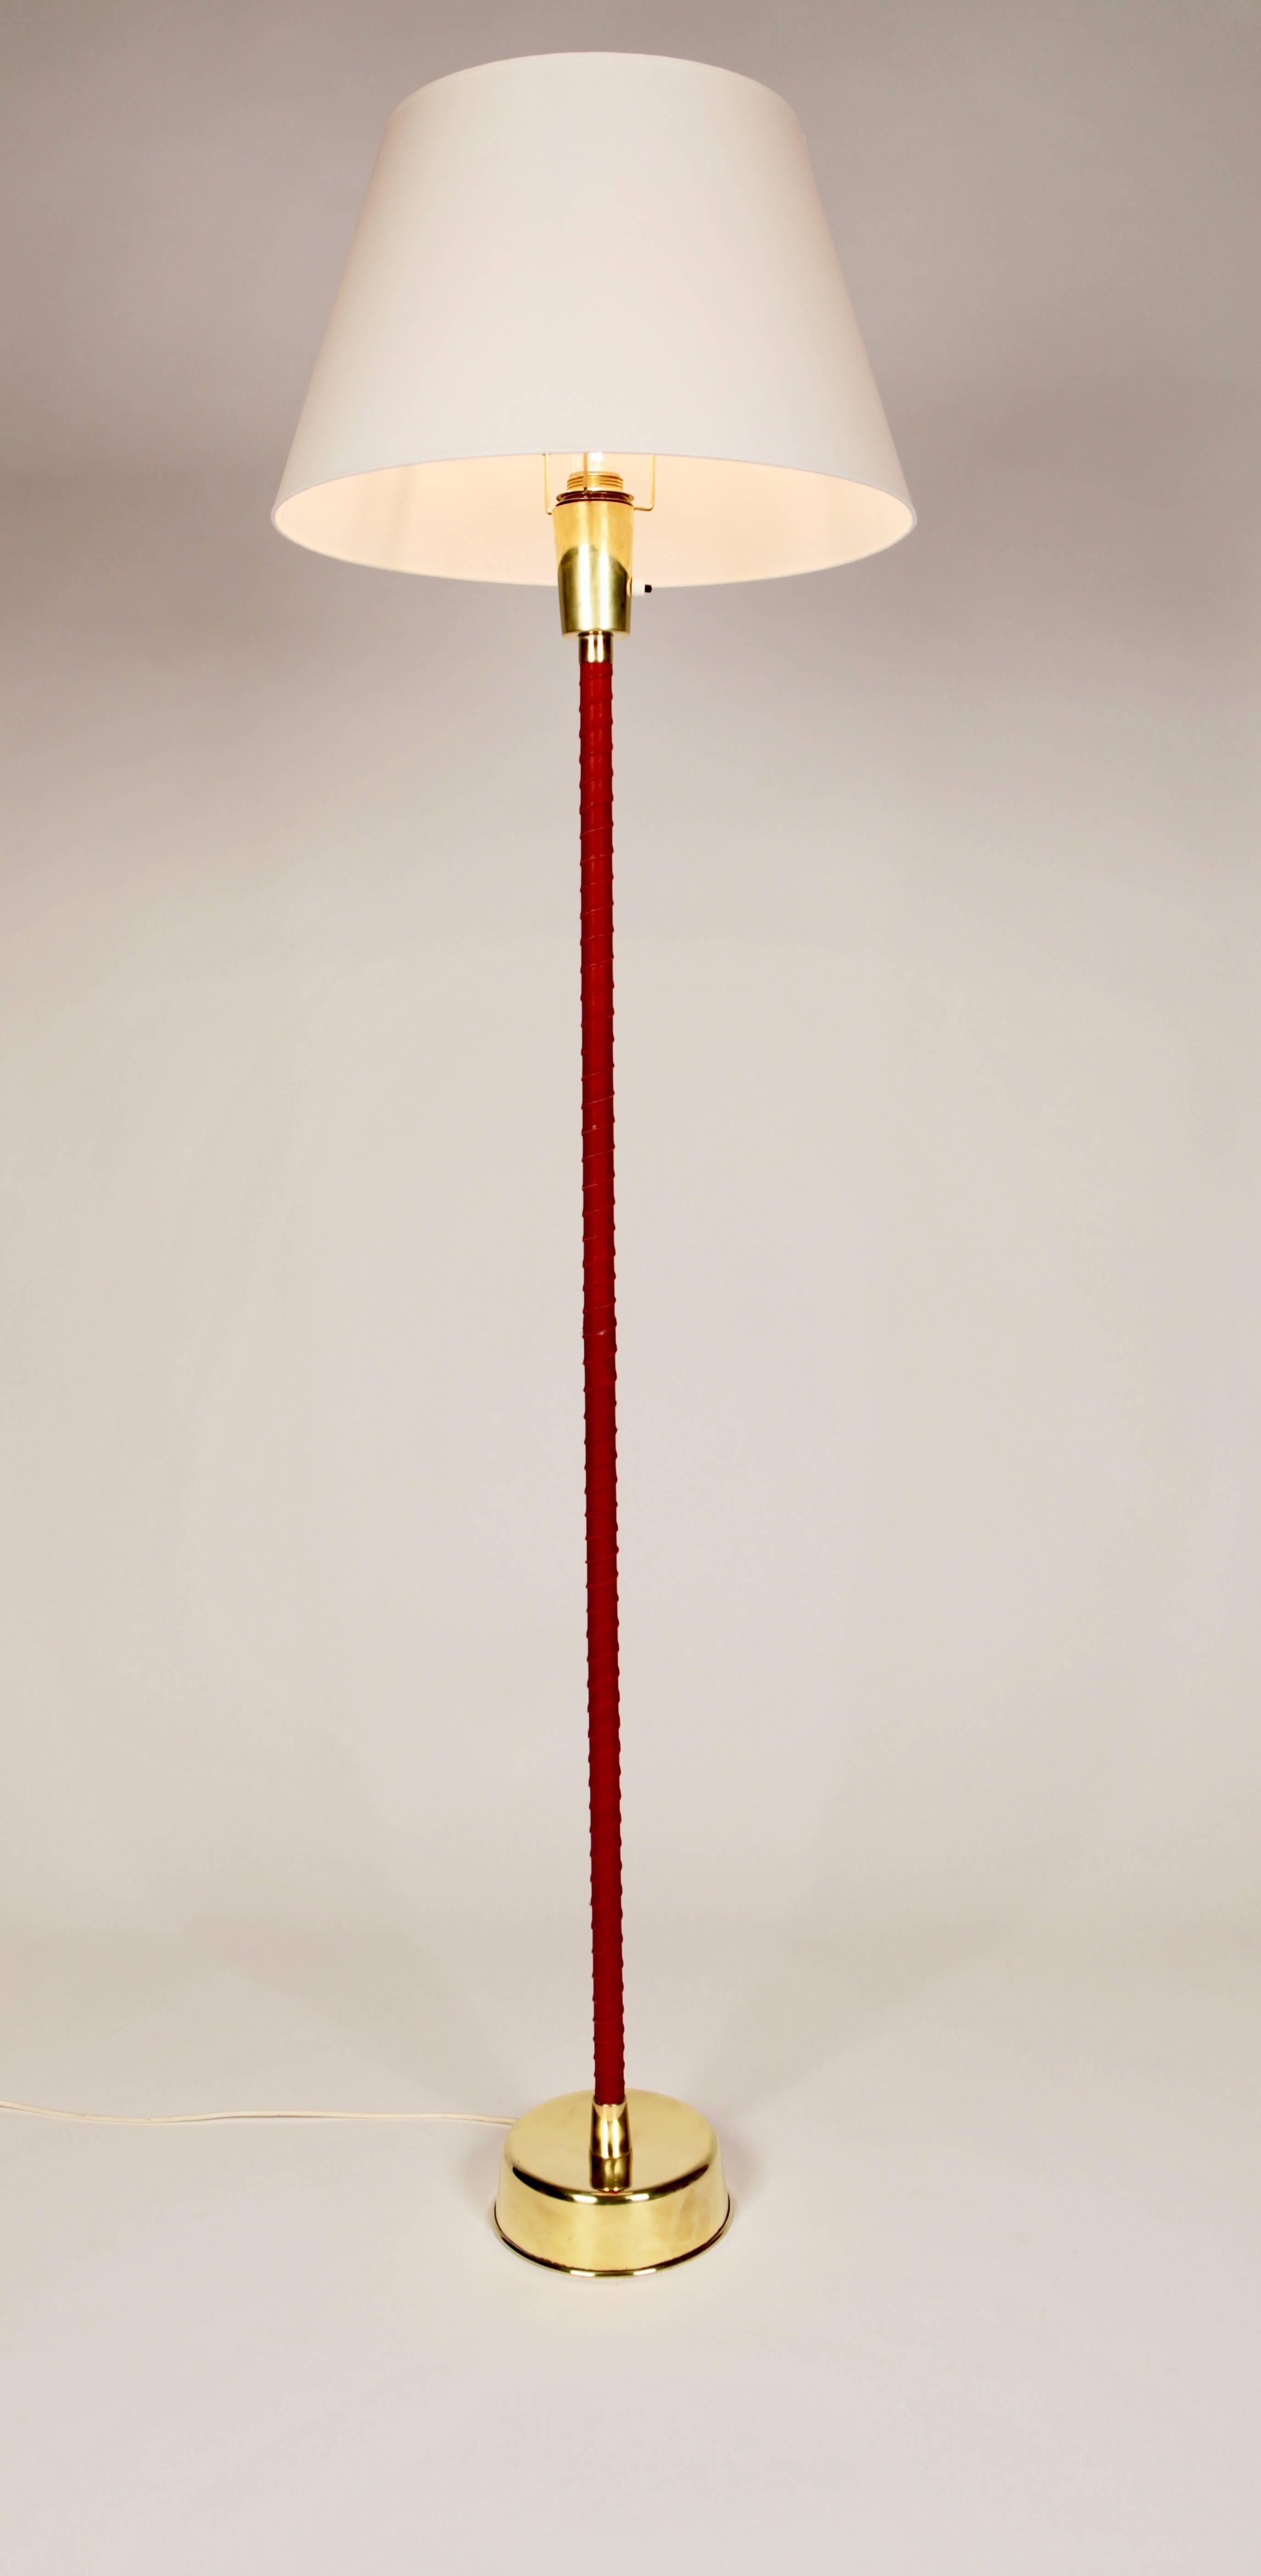 Lisa Johansson-Pape.
Floor lamp, manufactured by Orno in Finland.
Red leather covered pole and brass socket.
Excellent condition, replaced shade.
Designed in the 1940s.